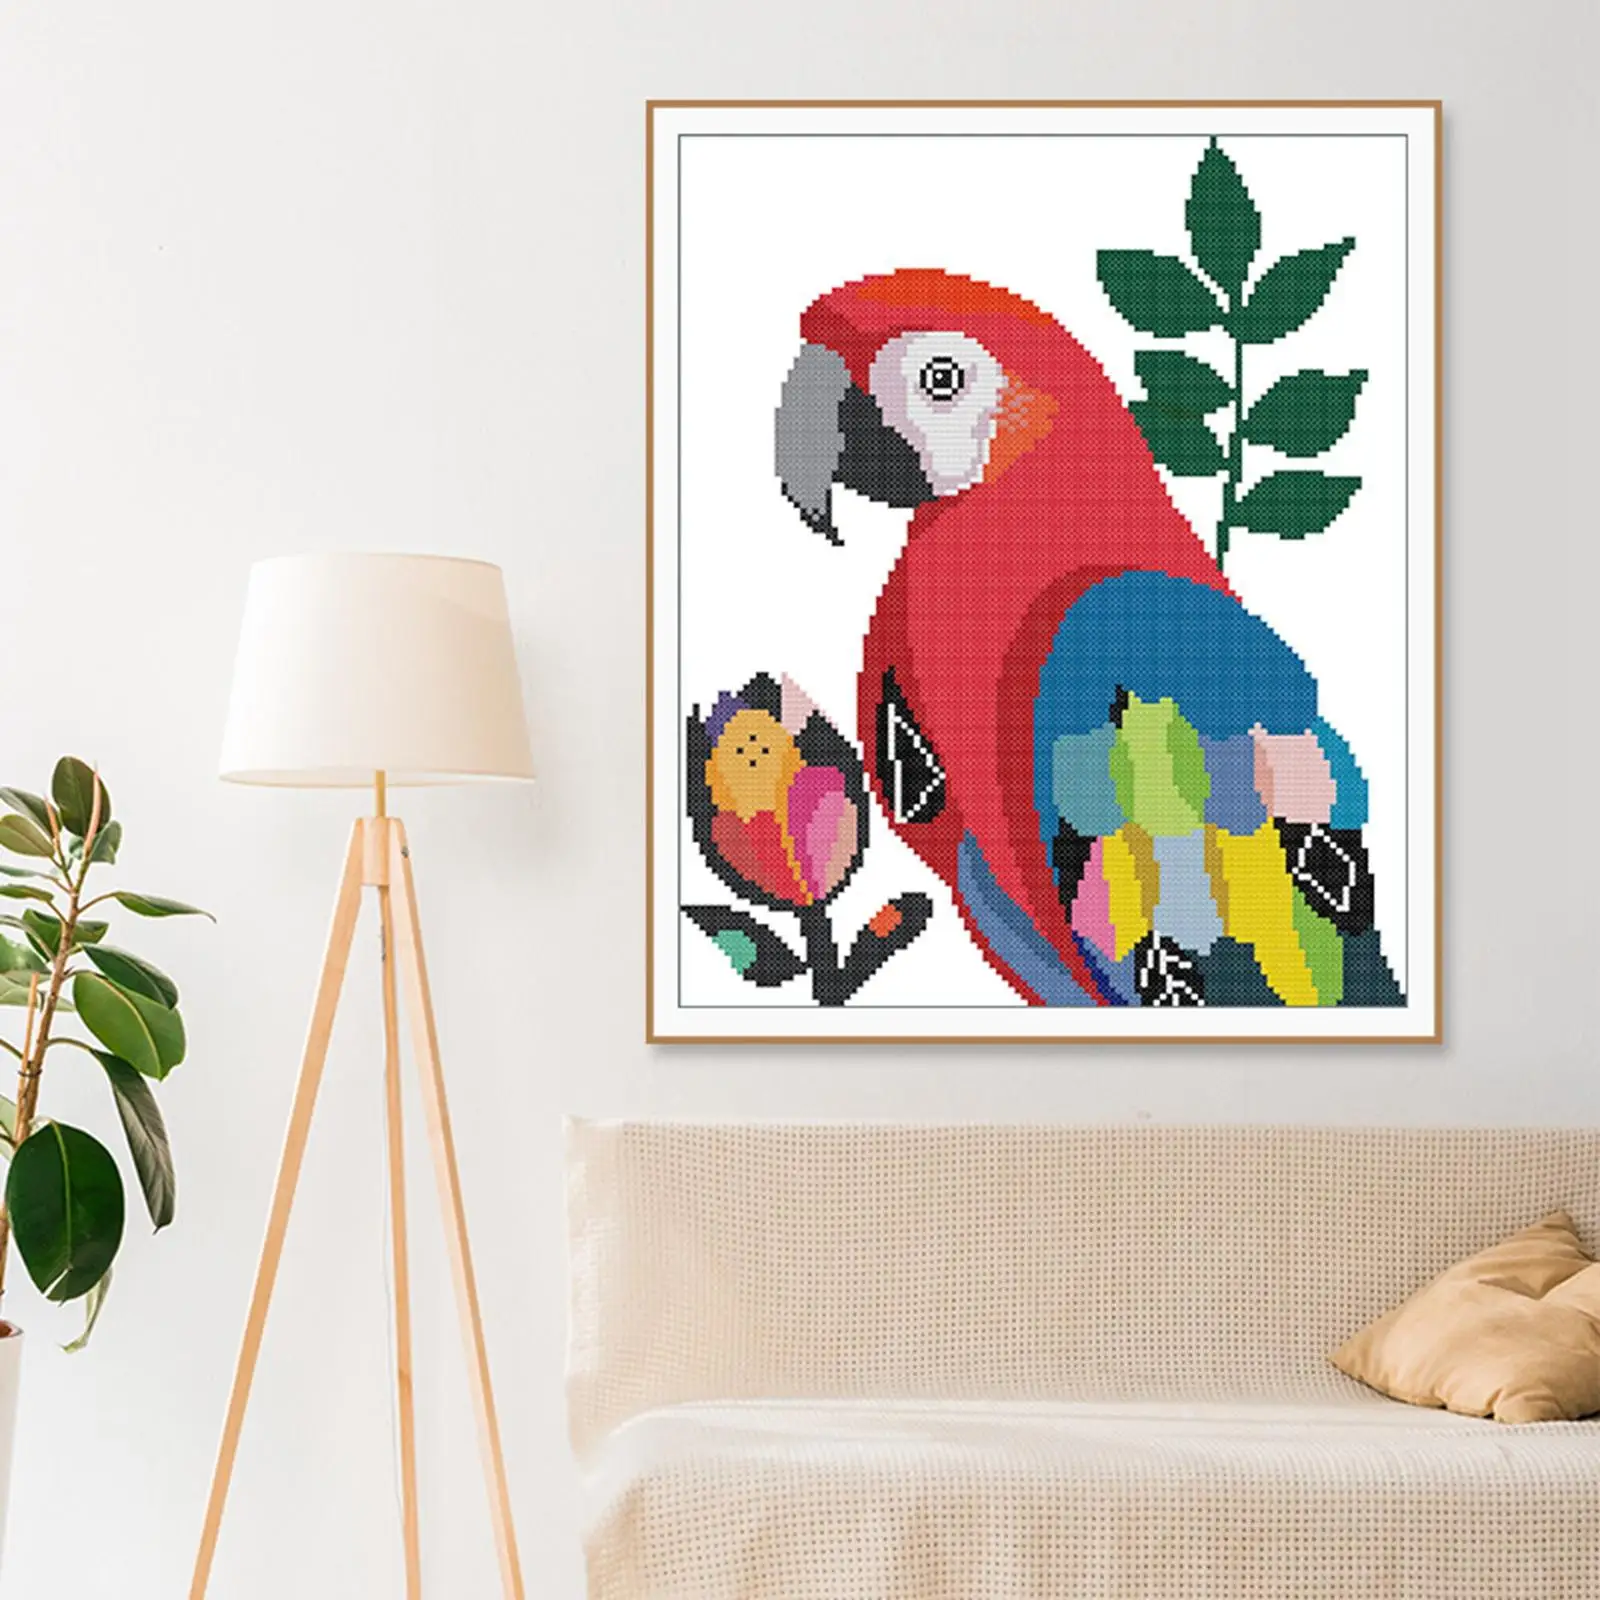 Parrot Cross Stitch Kit with Basic Tools DIY Full Embroidery Starter Kits Needlework Arts Crafts for Beginners Home Wall Decor